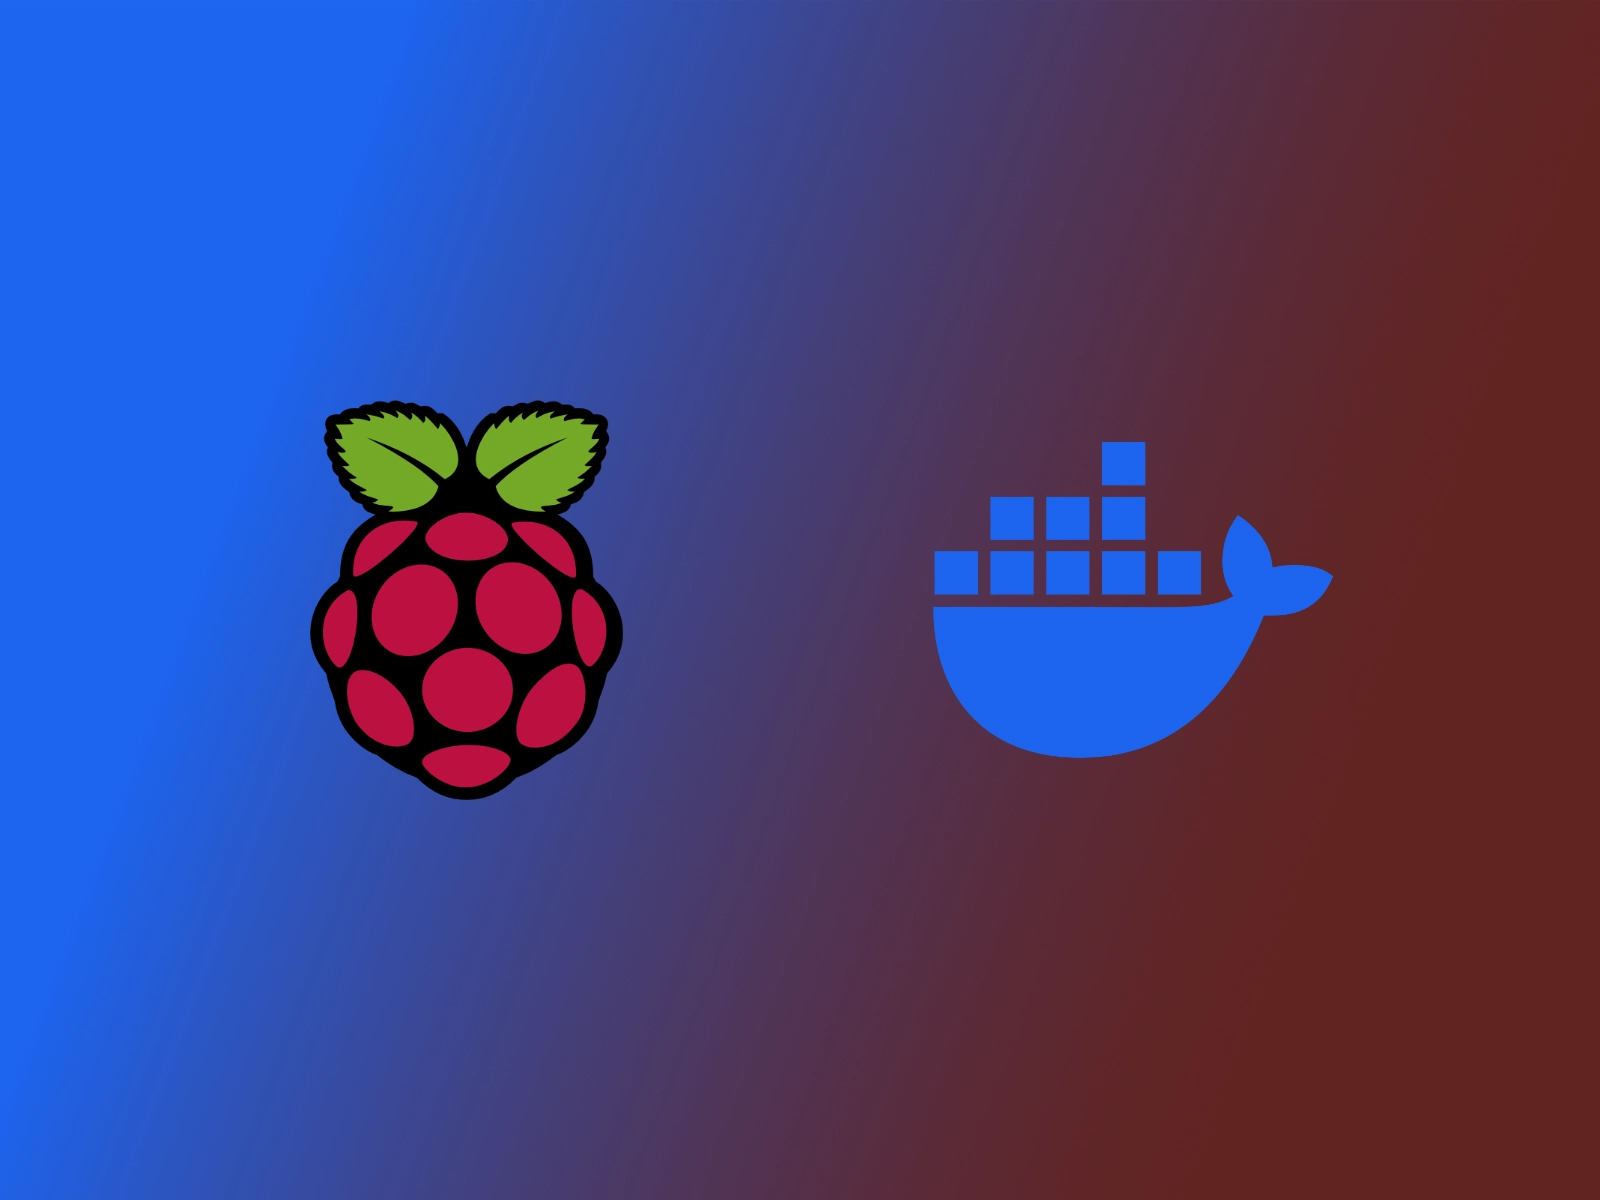 Raspberry Pi and Docker logos over a gradient